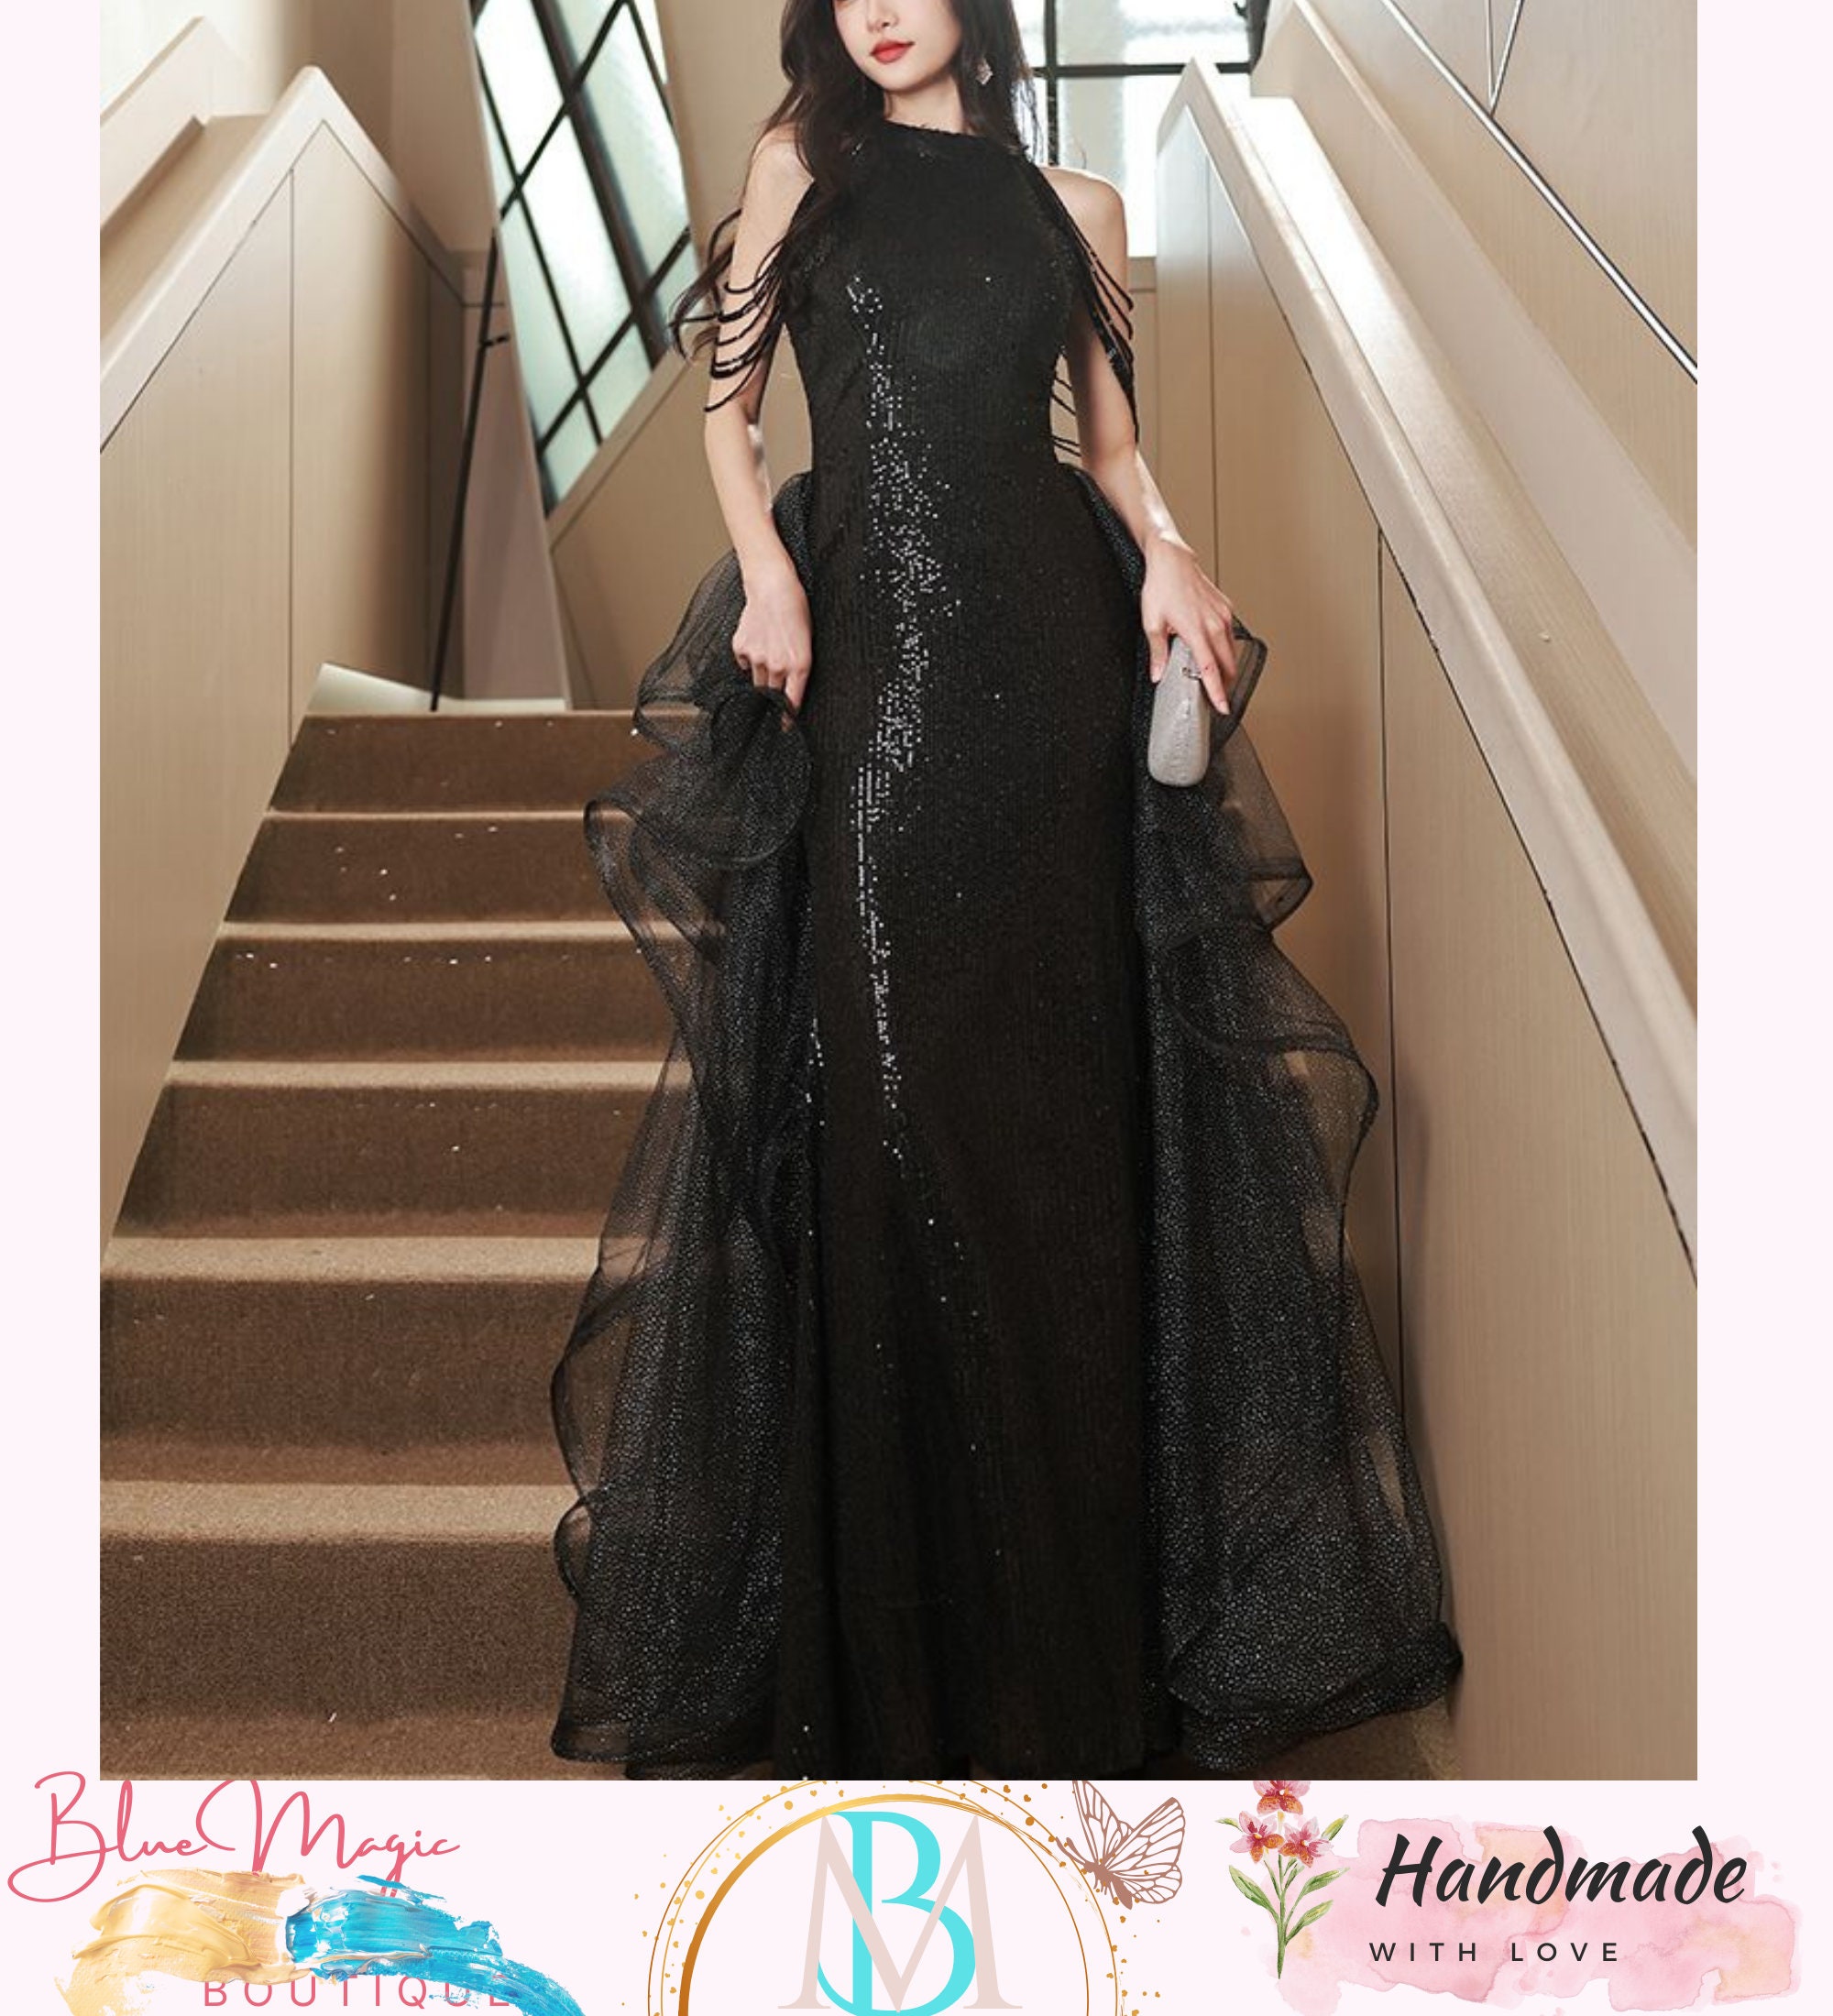 Black Ball Gown -  Canada